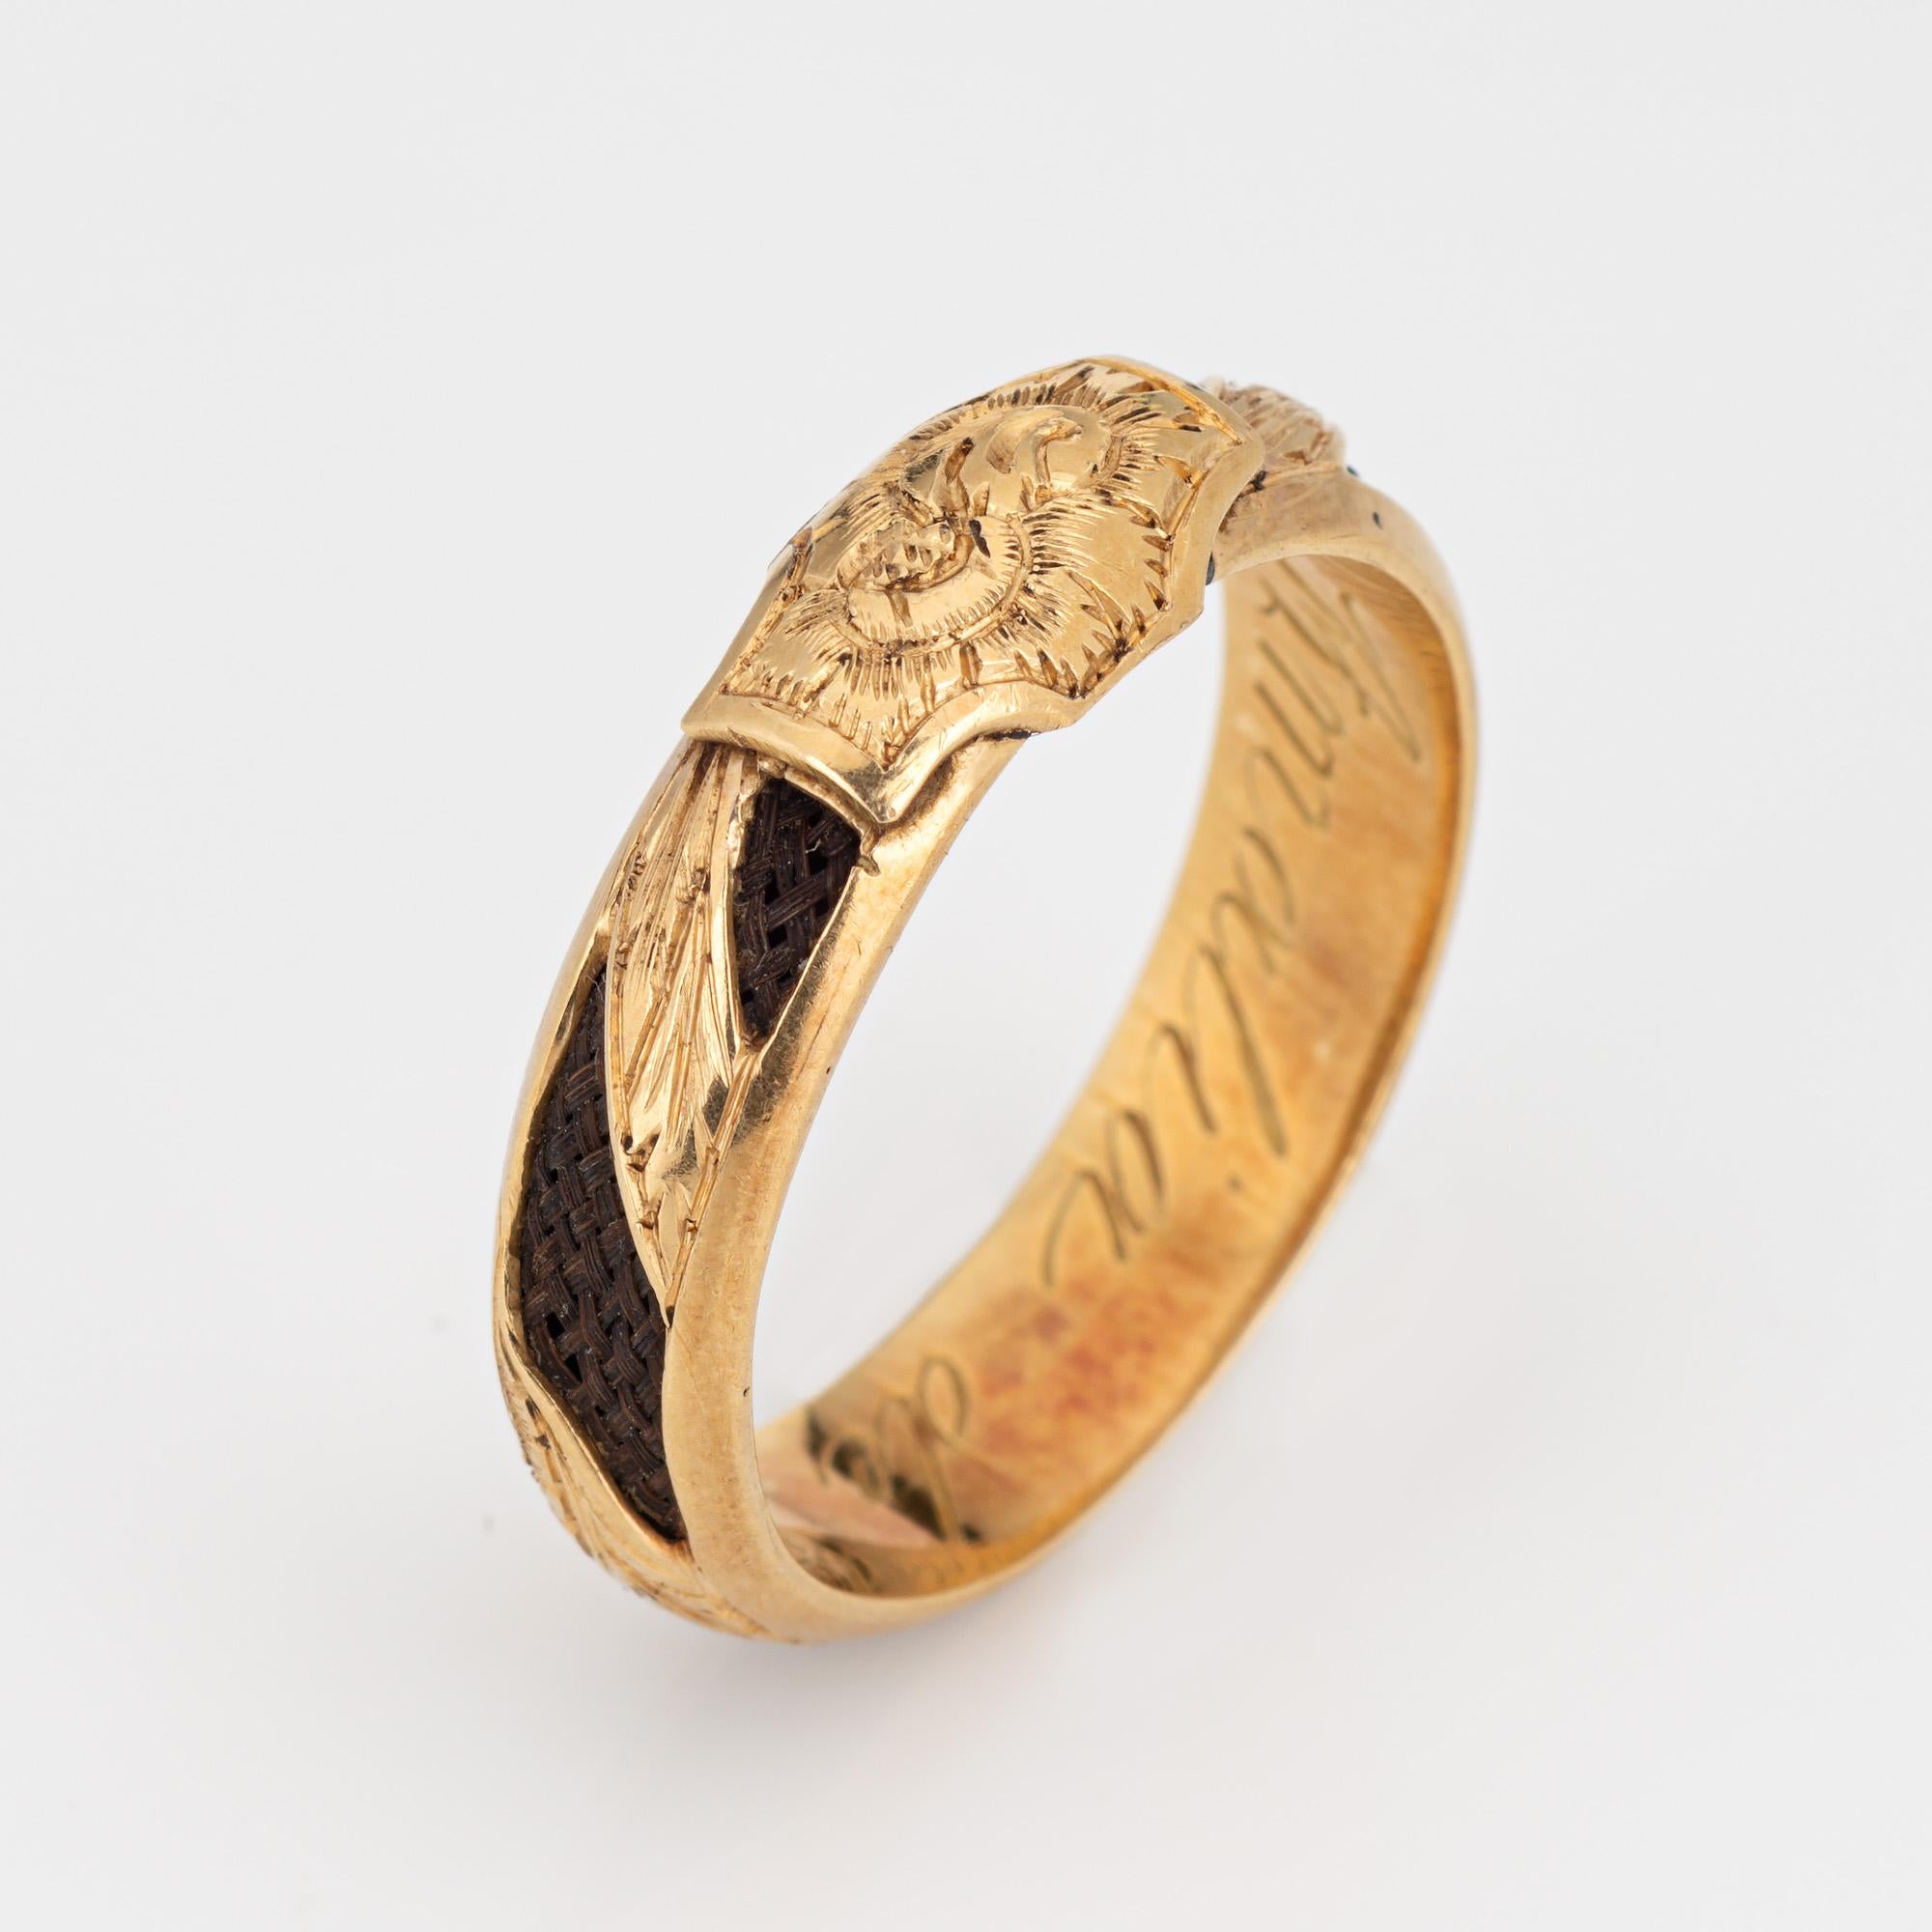 Finely detailed antique Victorian ring (circa 1880s to 1900s), crafted in 18 karat yellow gold. 

In the Victorian era, hair jewelry held immense sentimental value and served as a unique and poignant form of remembrance and mourning. The ring has